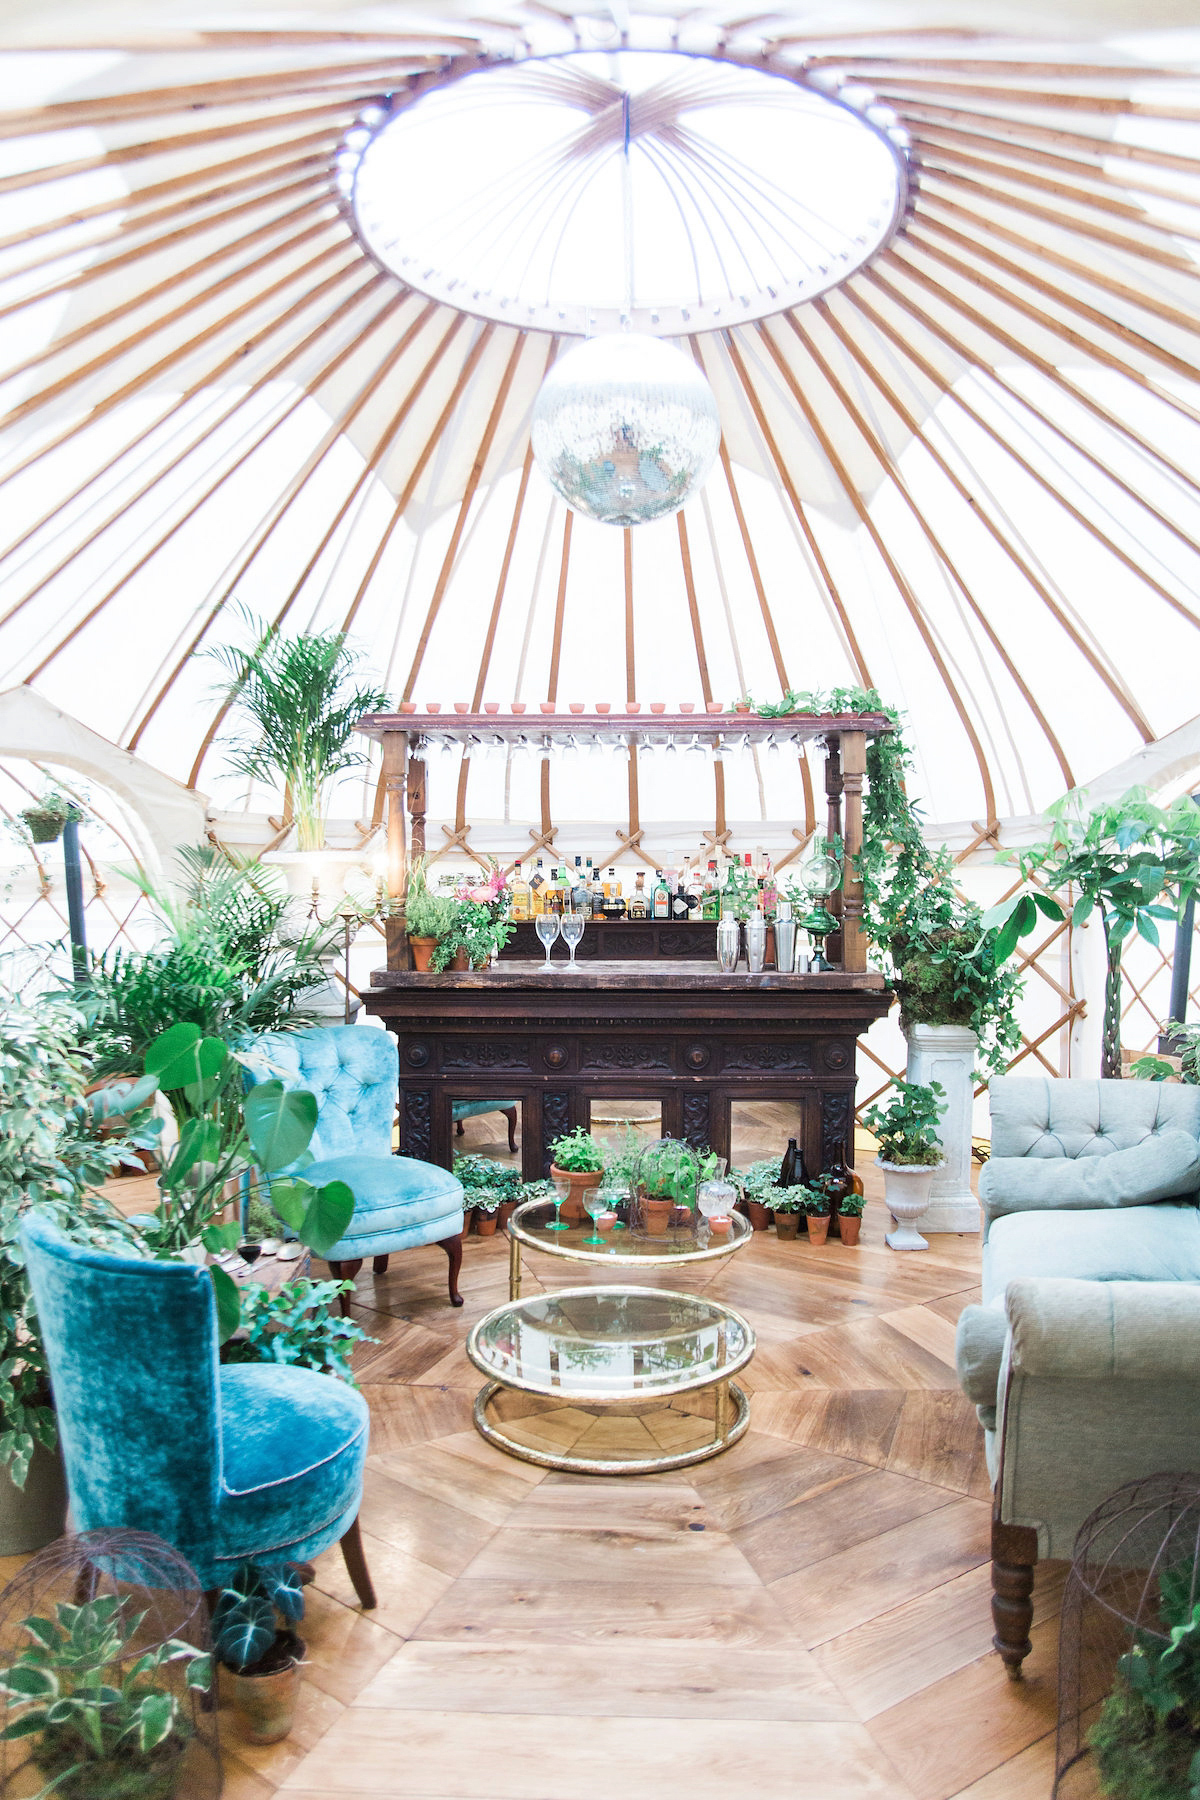 Natural Beauty - a free spirited styled shoot by Wedding Yurts, available for hire throughout the UK.